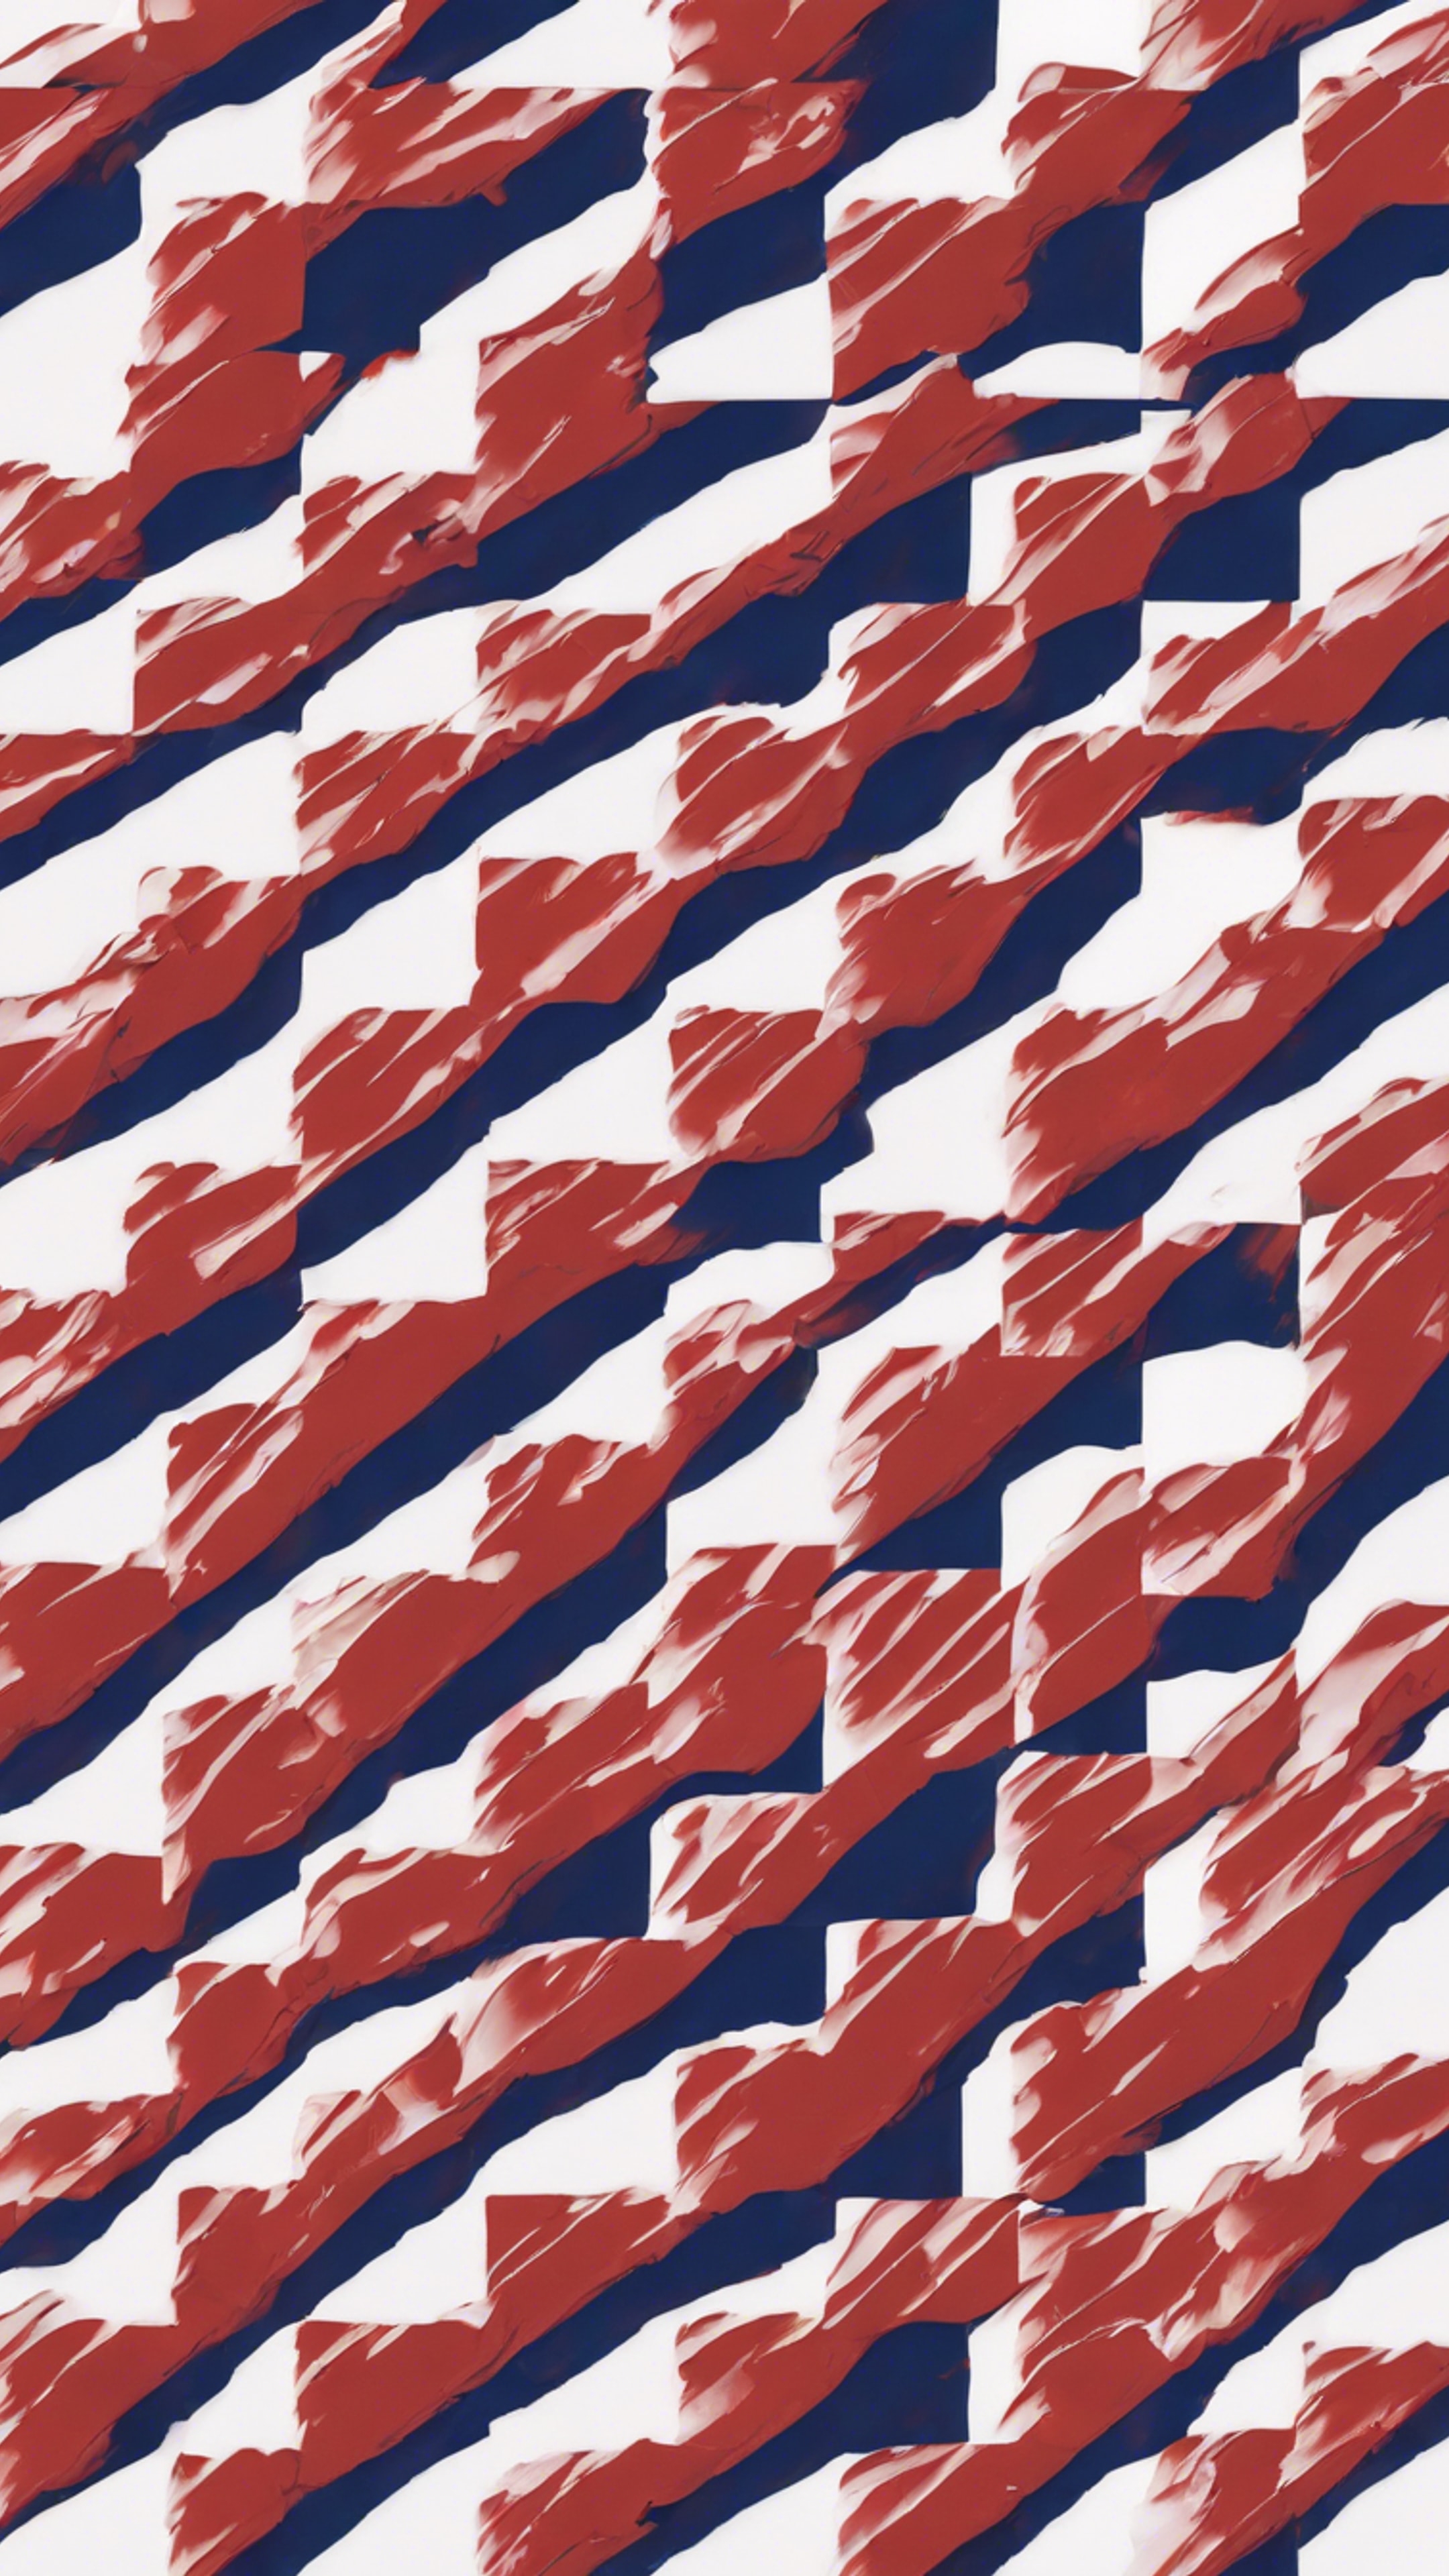 Red and navy checkered pattern running diagonally.壁紙[9dd6ce1238554ca9a6a4]